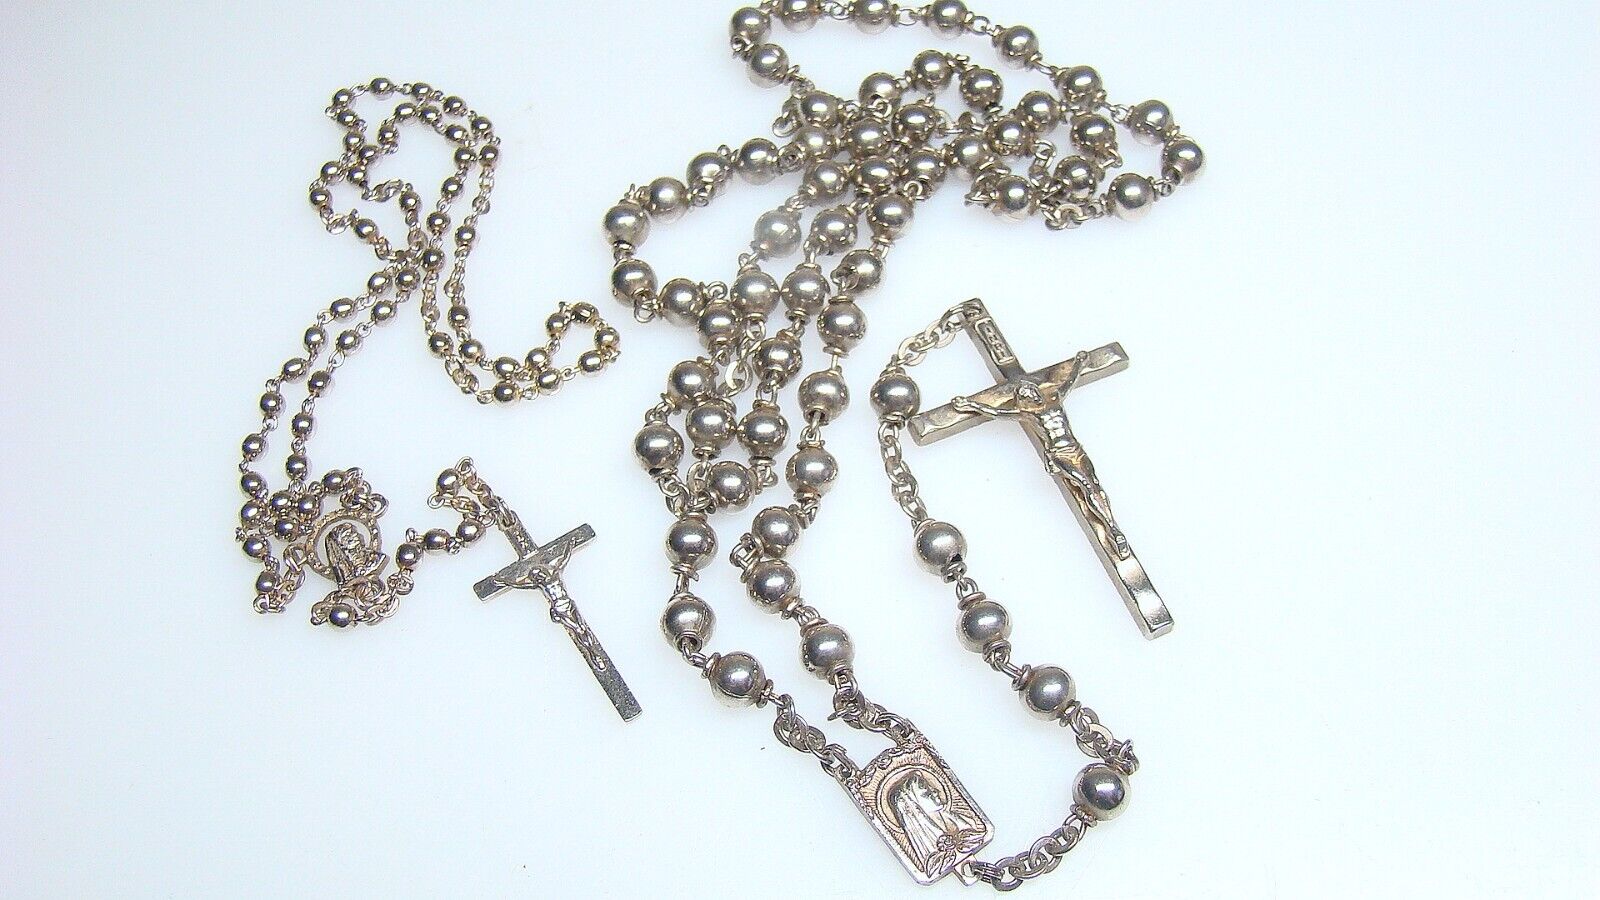 Vintage Pull Chain Type Rosaries w Metal Beads Lot